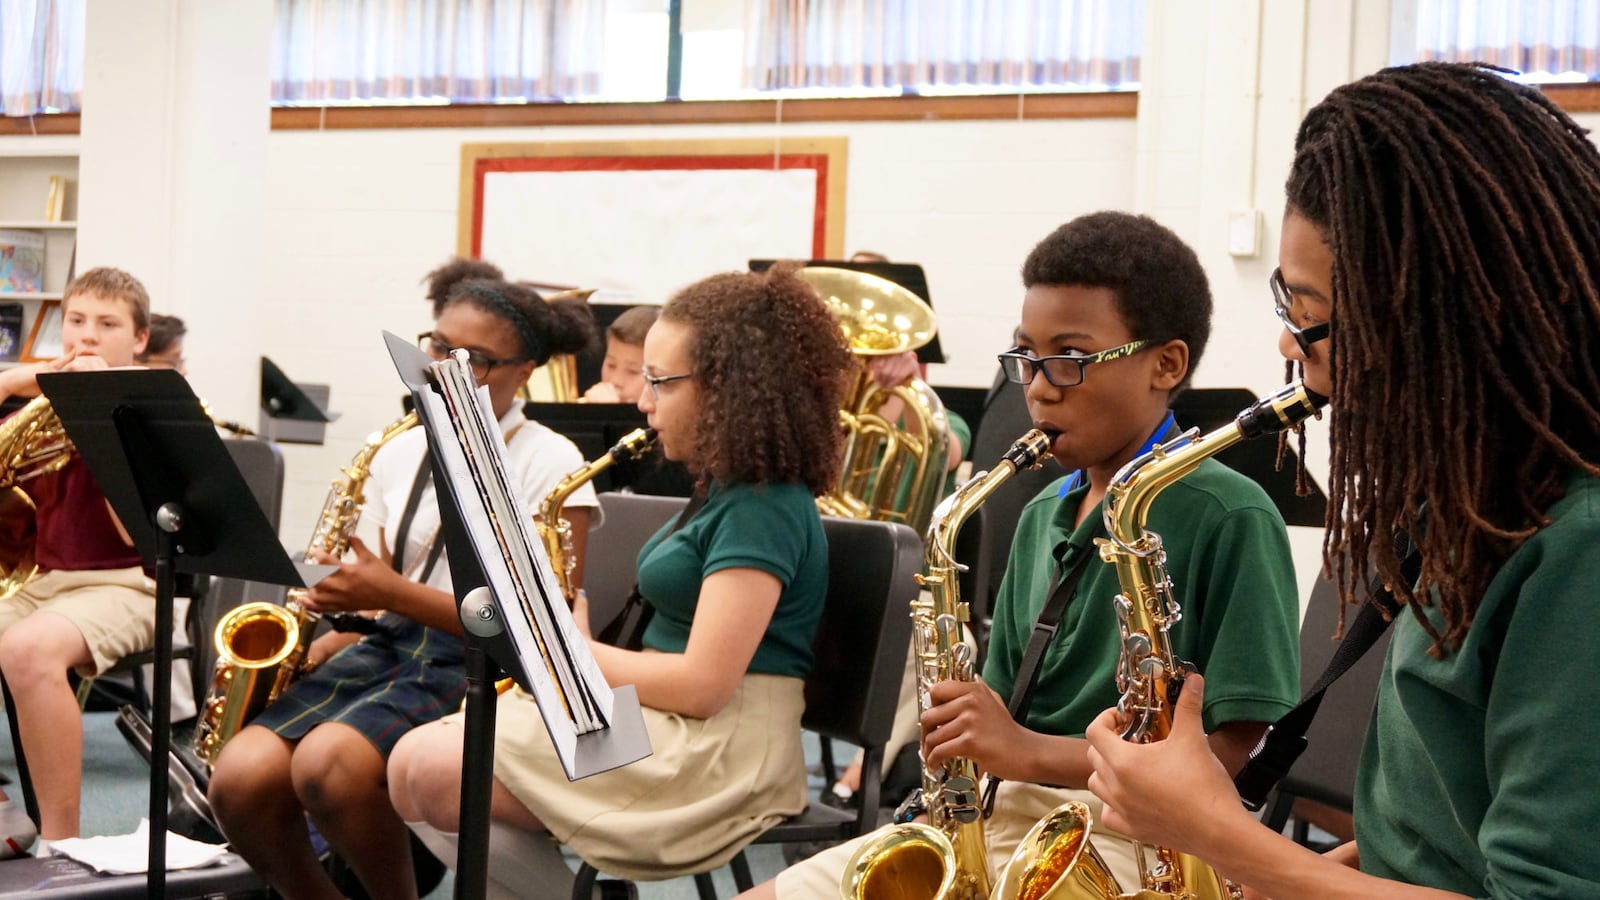 Students at the Oaks Academy in Indianapolis, a private school, play during music practice. The Oaks accepts tax credit scholarships.